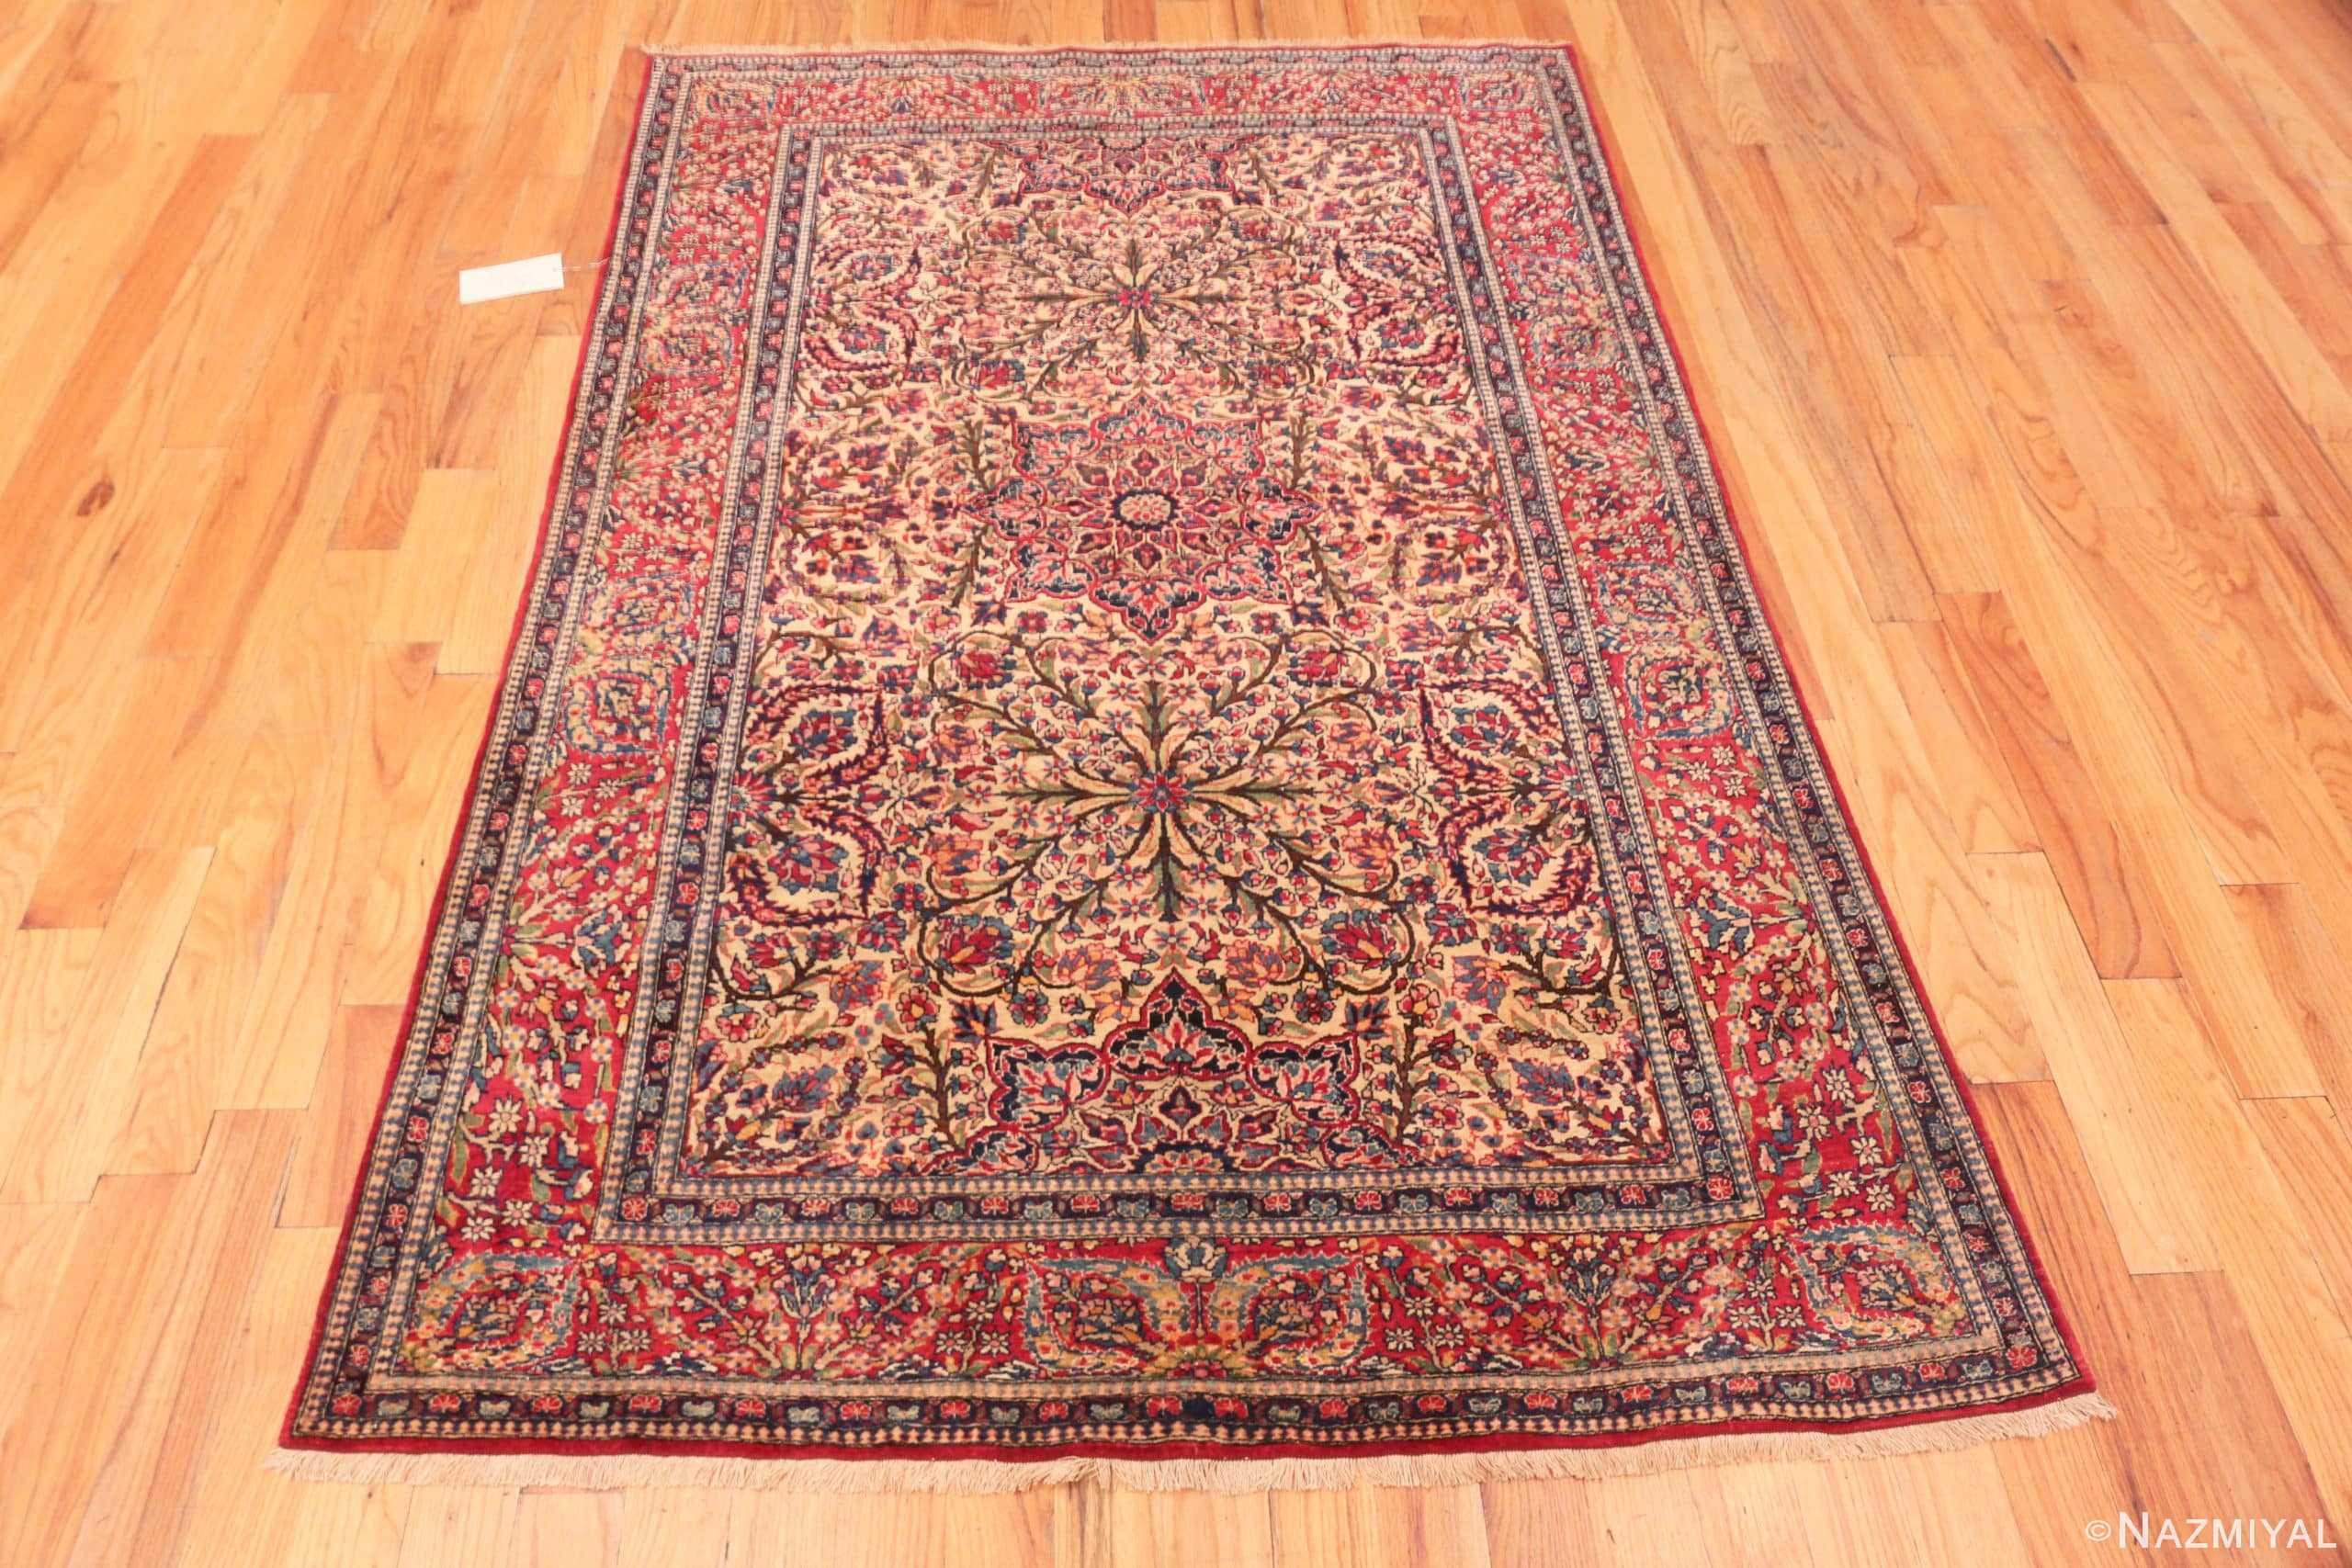 Whole View Of Magnificent Antique Persian Isfahan Rug 71118 by Nazmiyal Antique Rugs